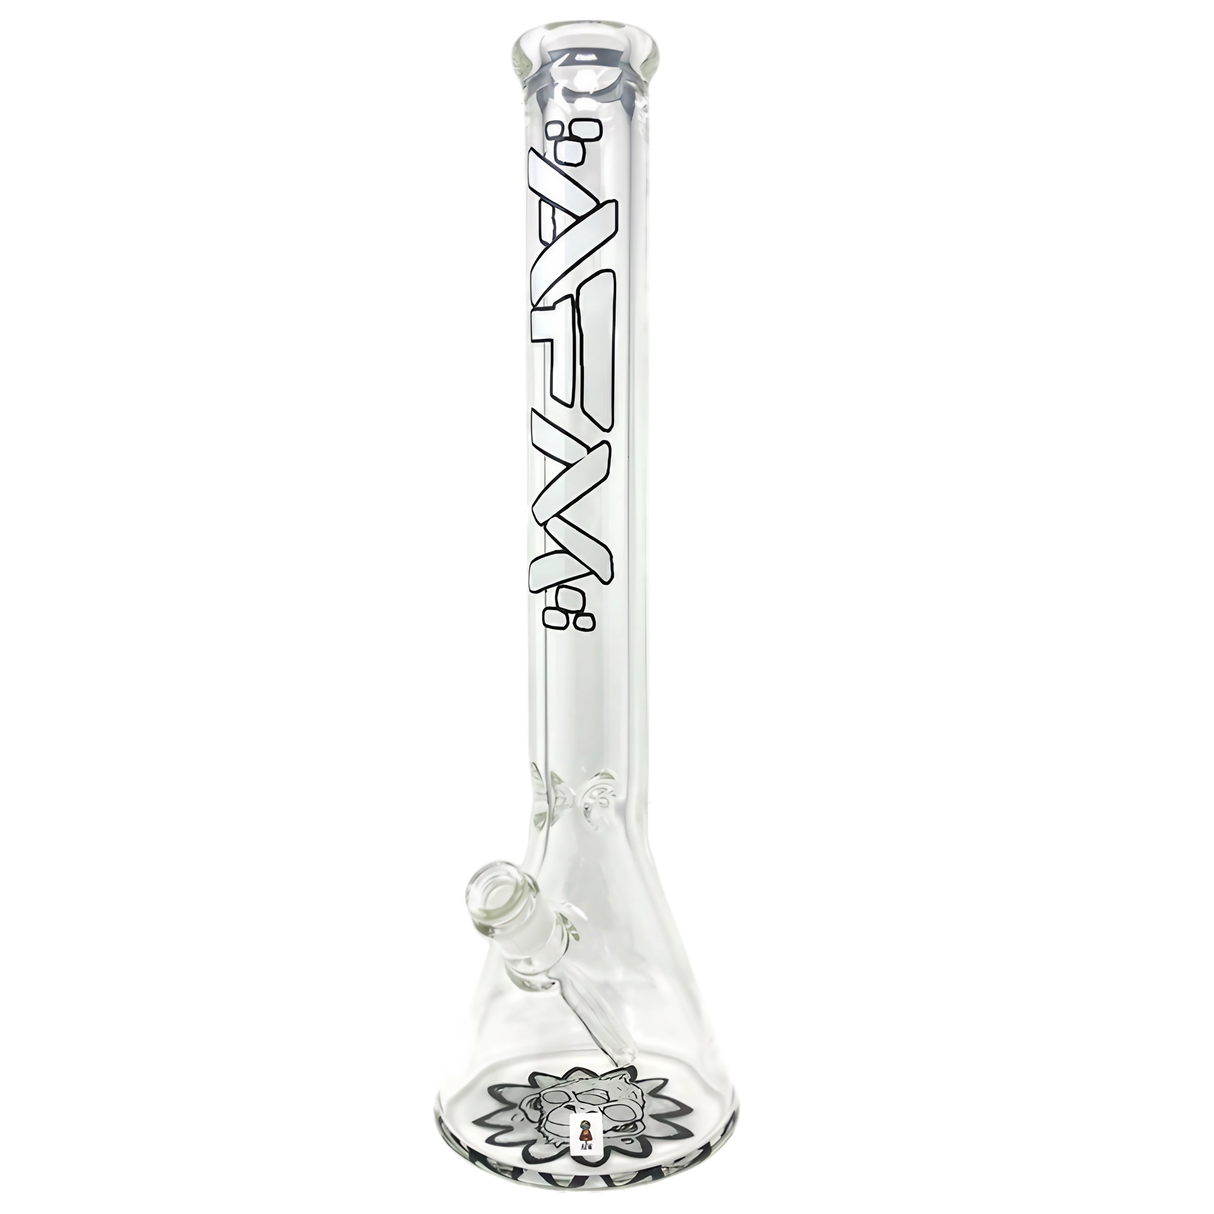 AFM Glass - The Flower Monkey 9mm Thick Beaker Bong, 18" Tall, Front View on White Background